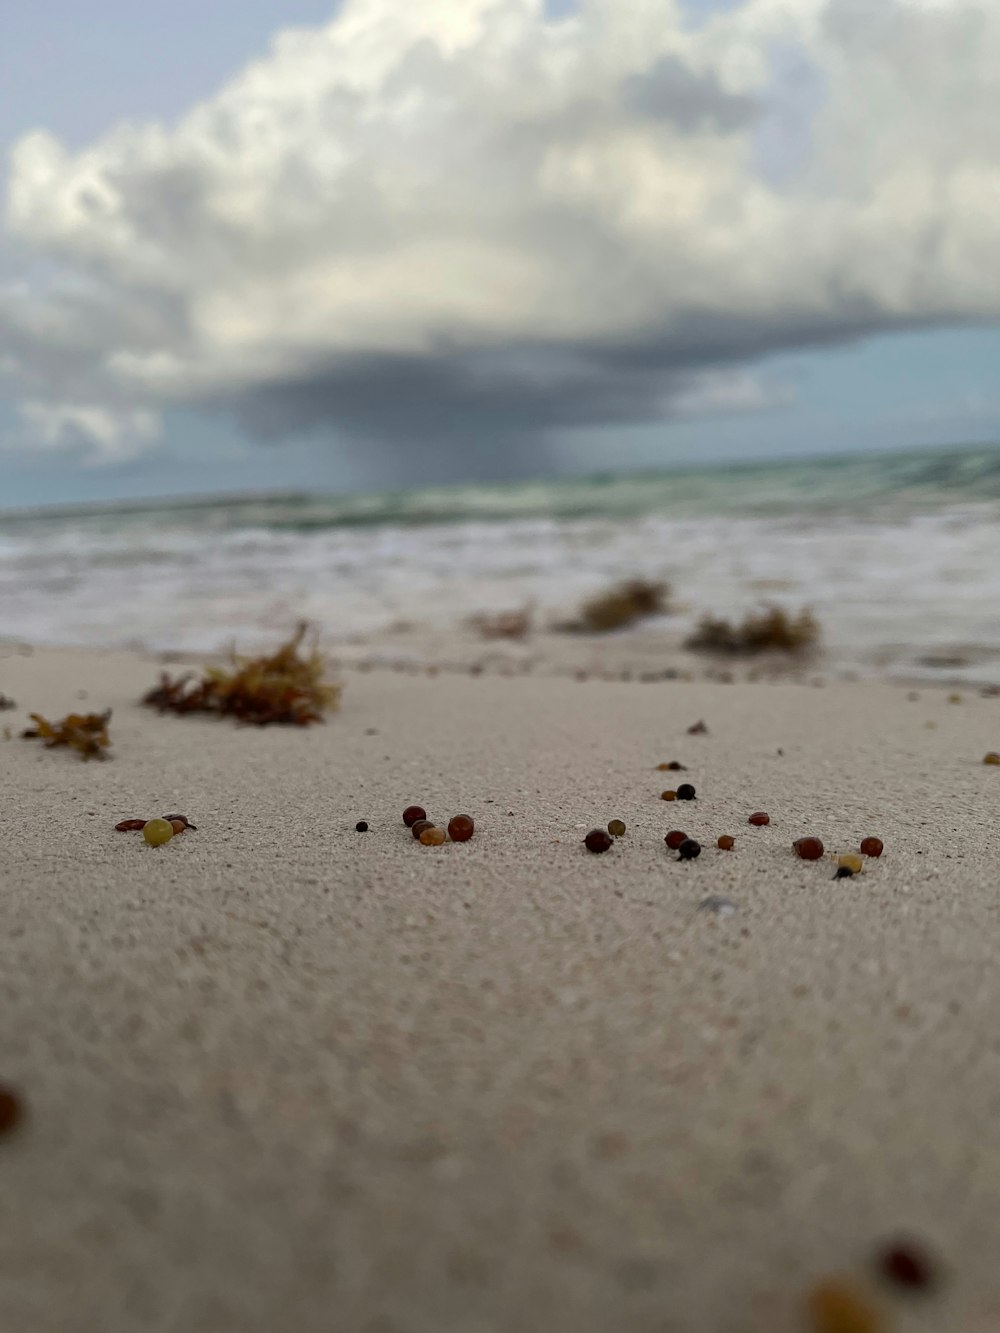 a close up of a beach with sand and seaweed